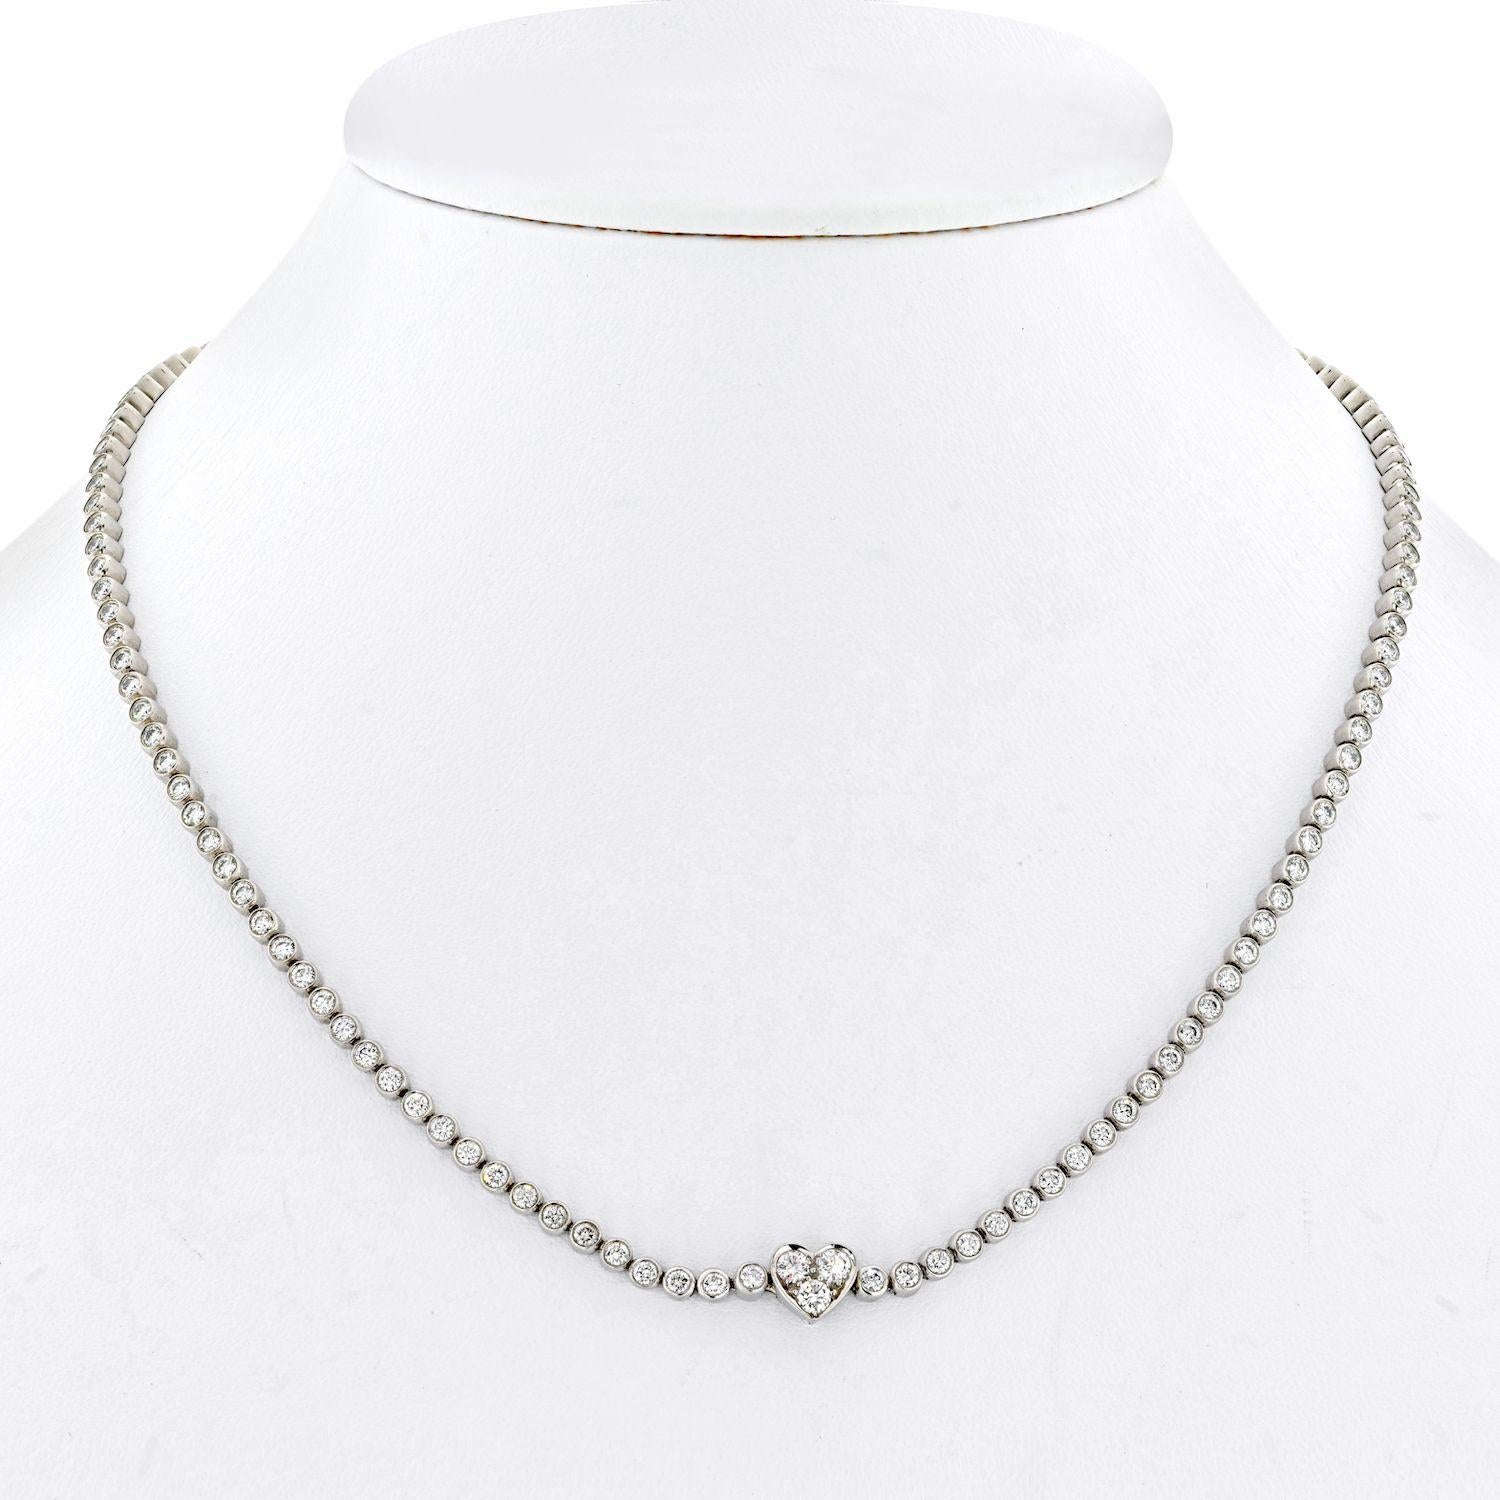 A series of bezel-set diamonds define this elegant tennis necklace, Tiffany & Co. 
The lock is beautifully crafted in a shape of a heart and can be worn in the front as well is in the back of the neck. 
Diamonds are of an exceptional quality just